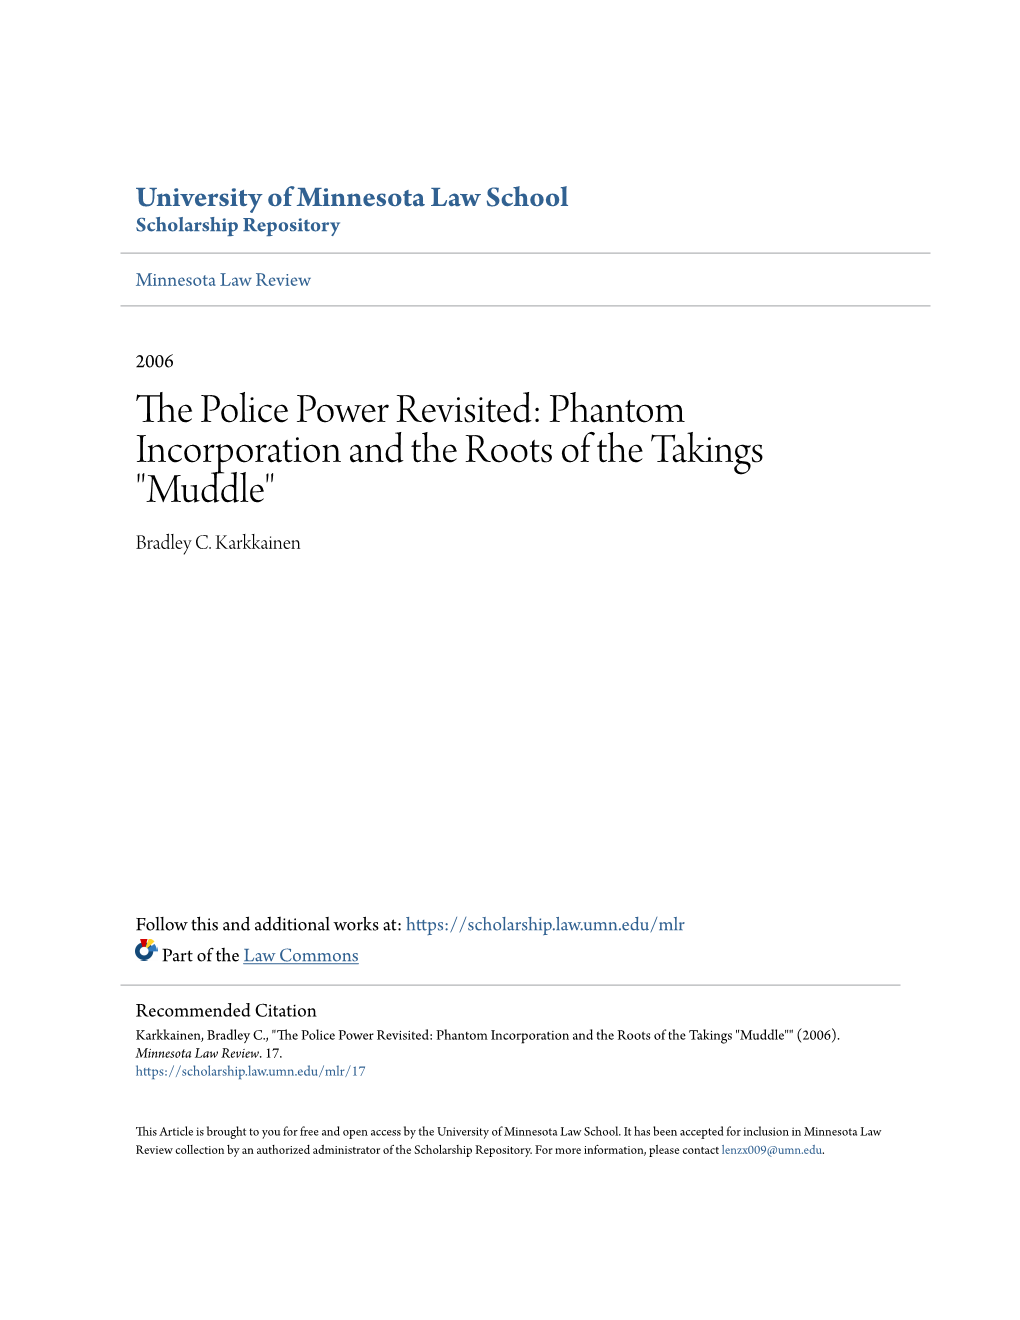 The Police Power Revisited: Phantom Incorporation and the Roots of the Takings “Muddle”